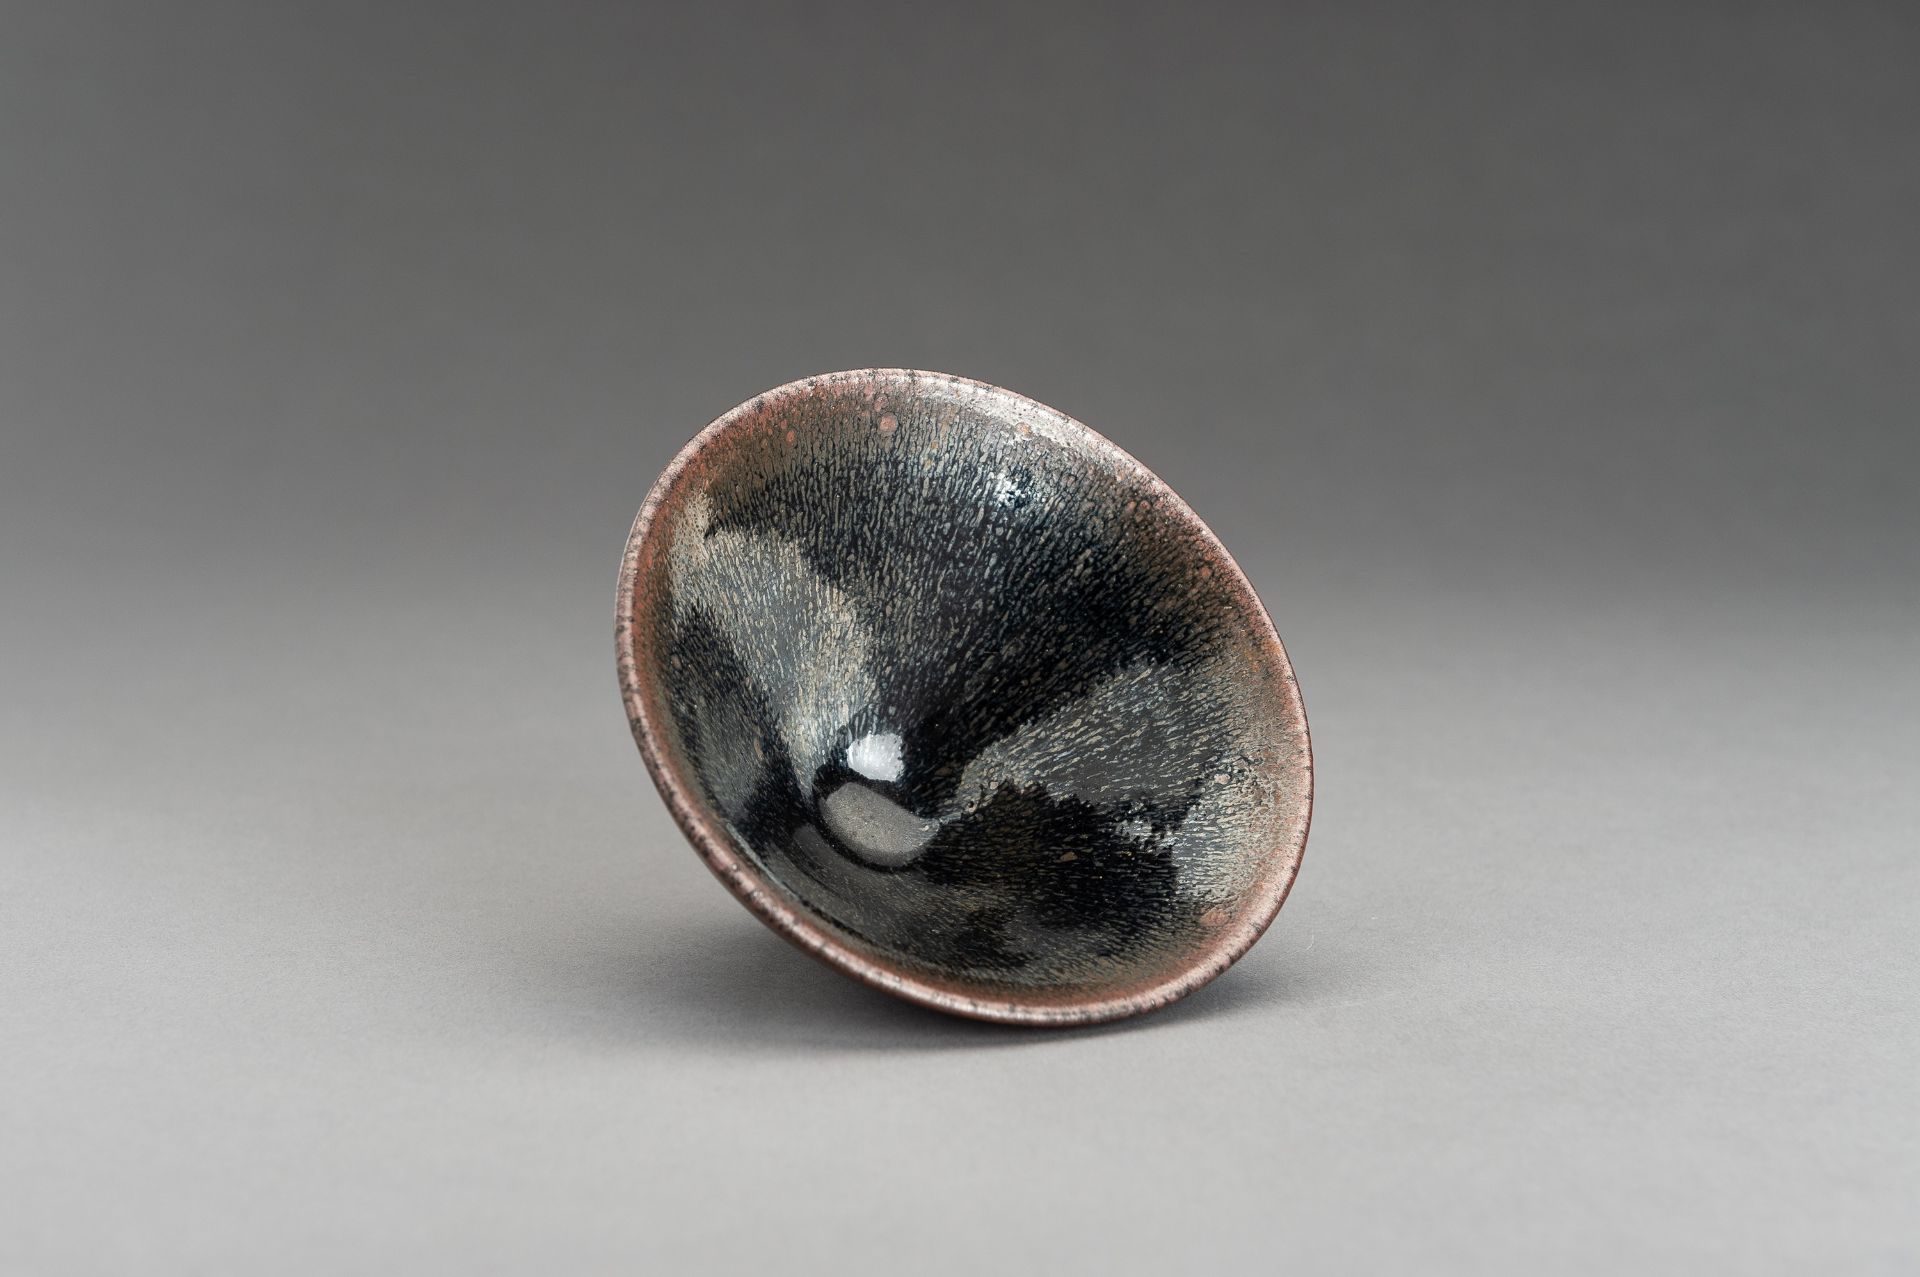 A JIAN WARE 'OIL SPOT' CONICAL CERAMIC BOWL - Image 5 of 12